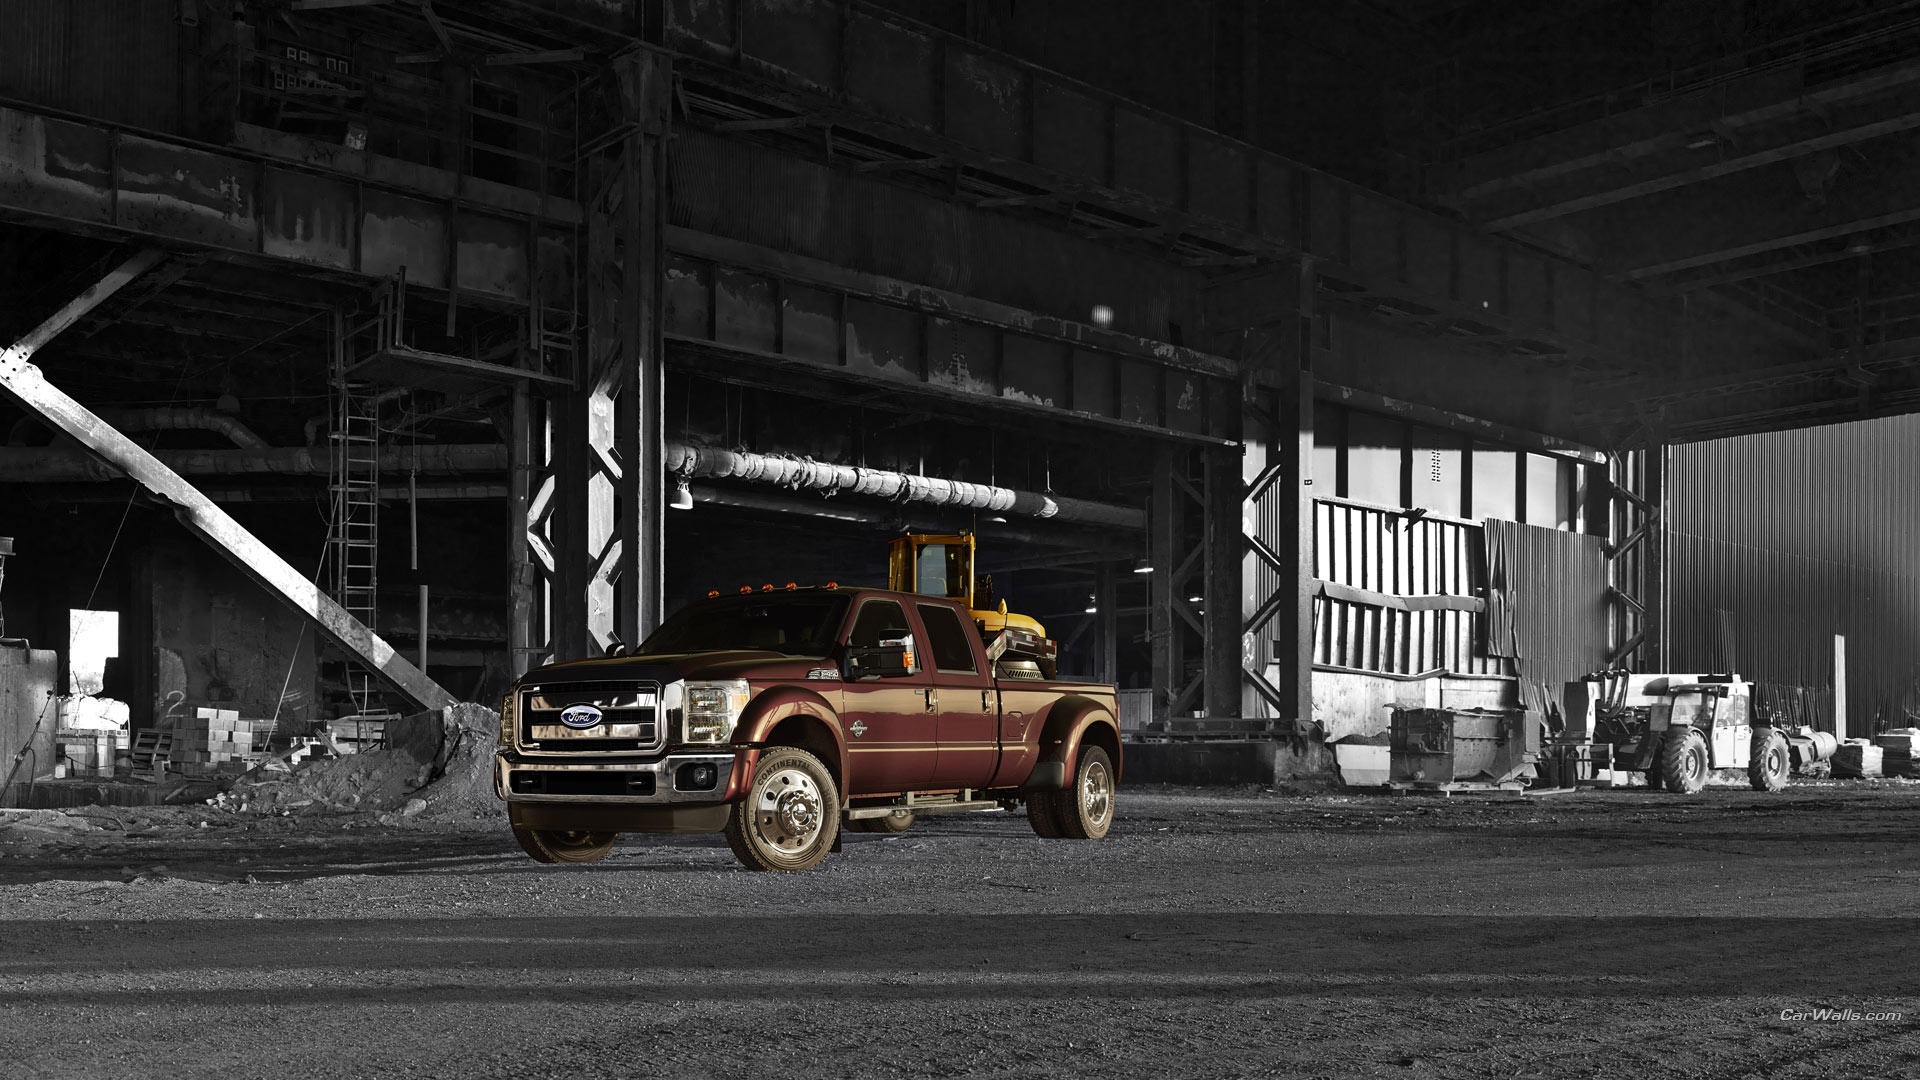 2015 Ford F-Series Super Duty Wallpapers